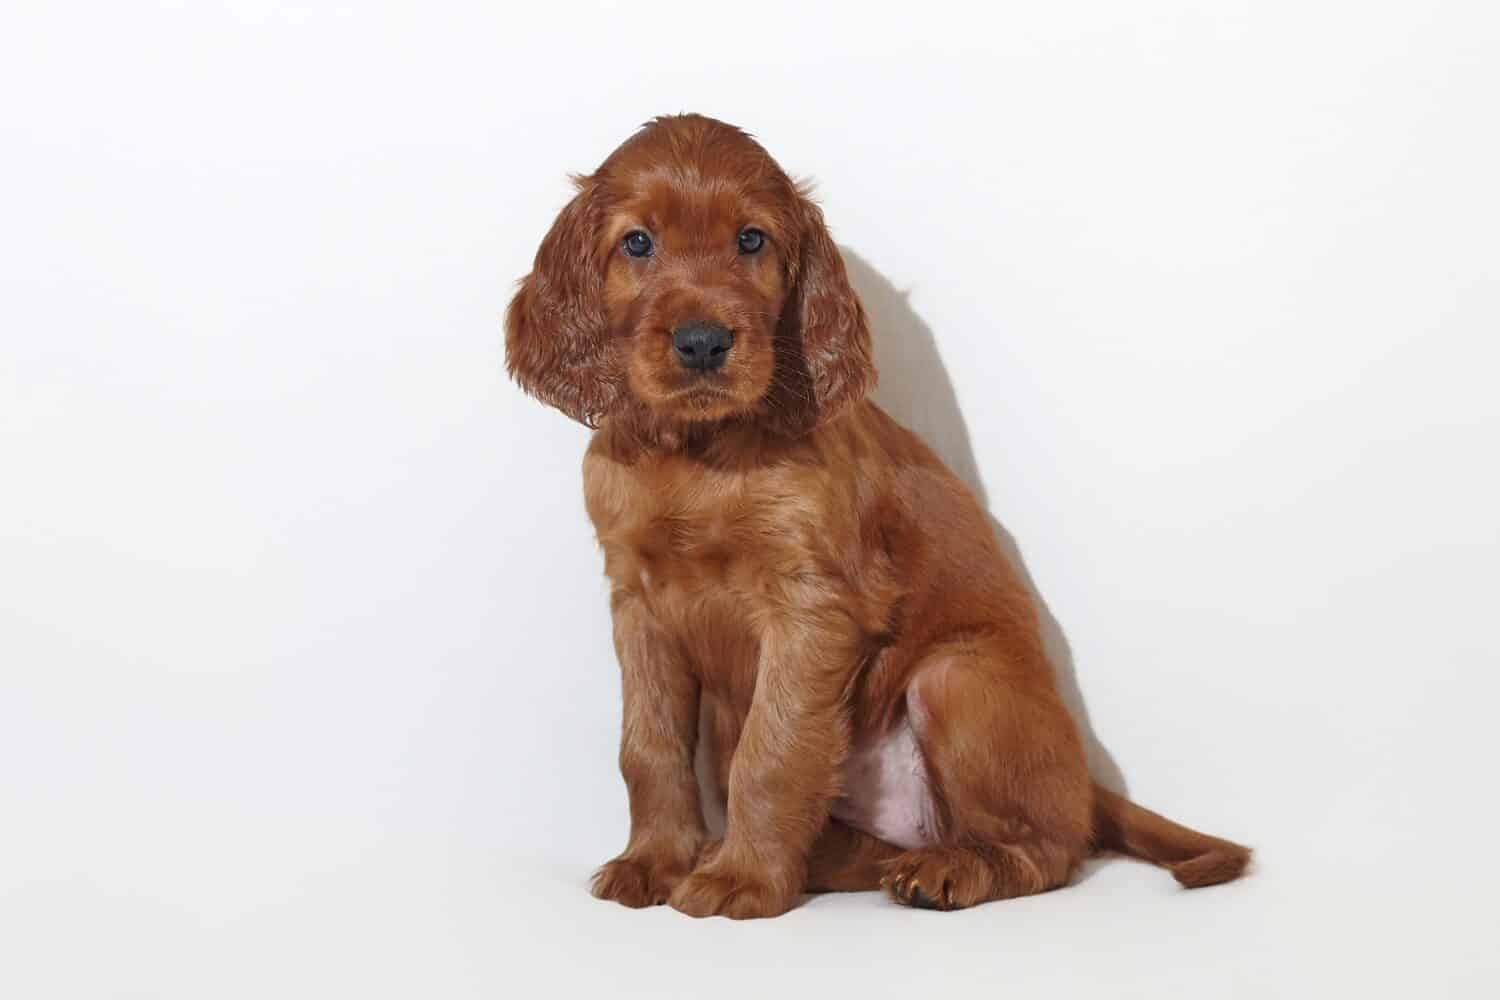 brown adorable Irish setter puppy. photo shoot in the studio on a white background.